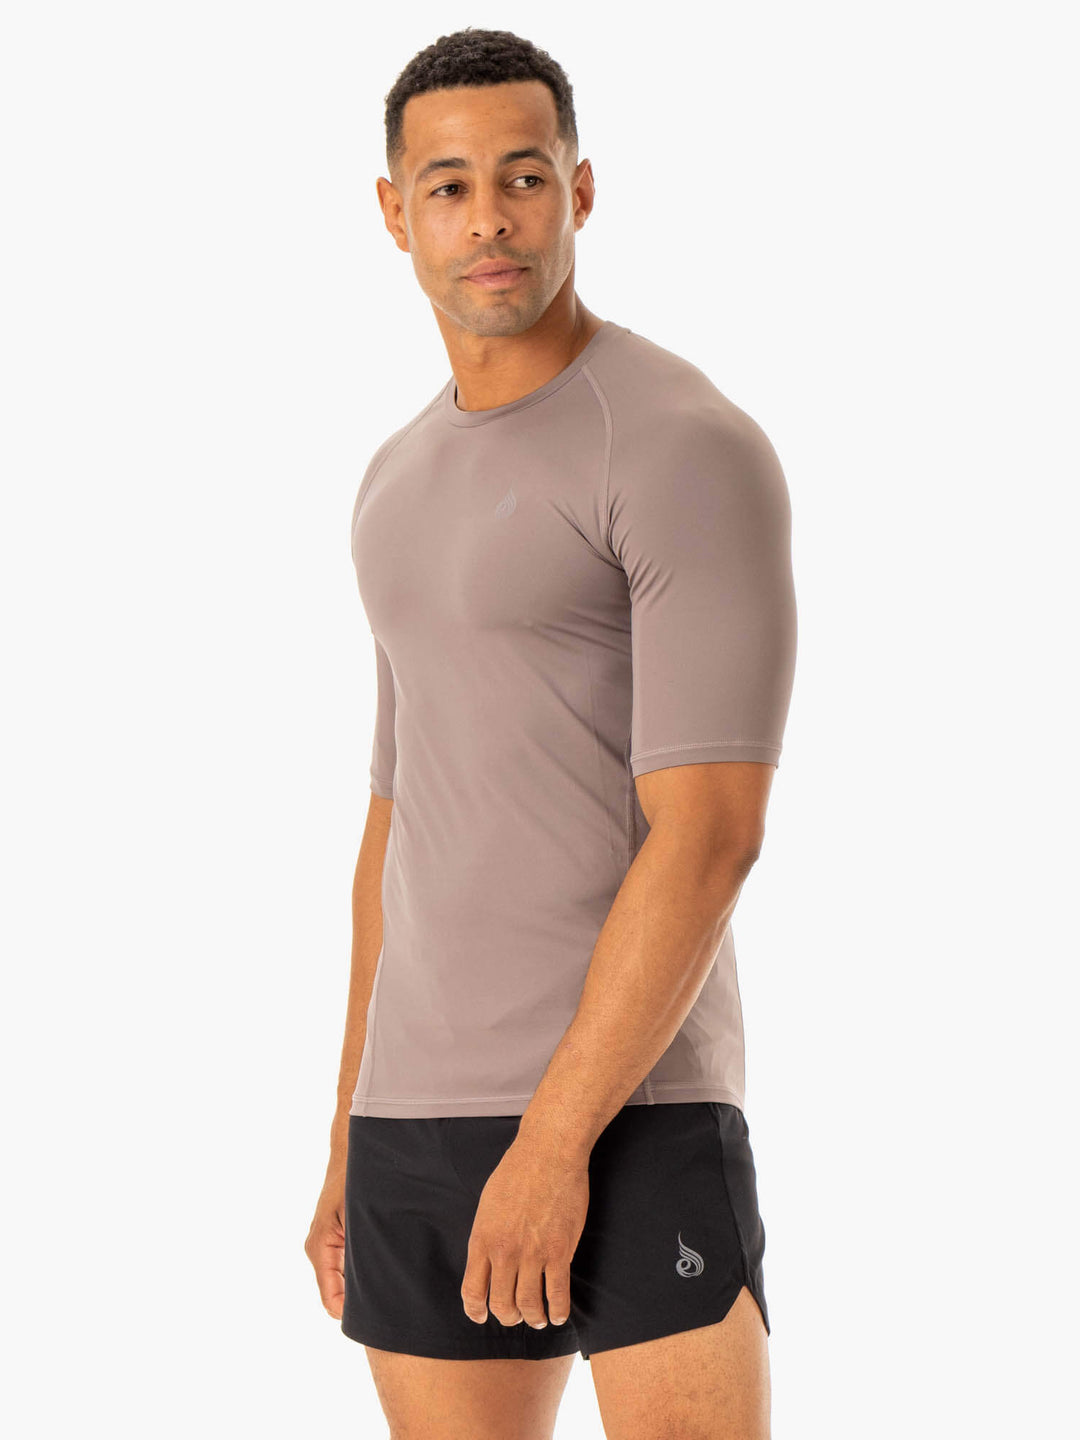 Division Base Layer T-Shirt - Taupe Clothing Ryderwear 